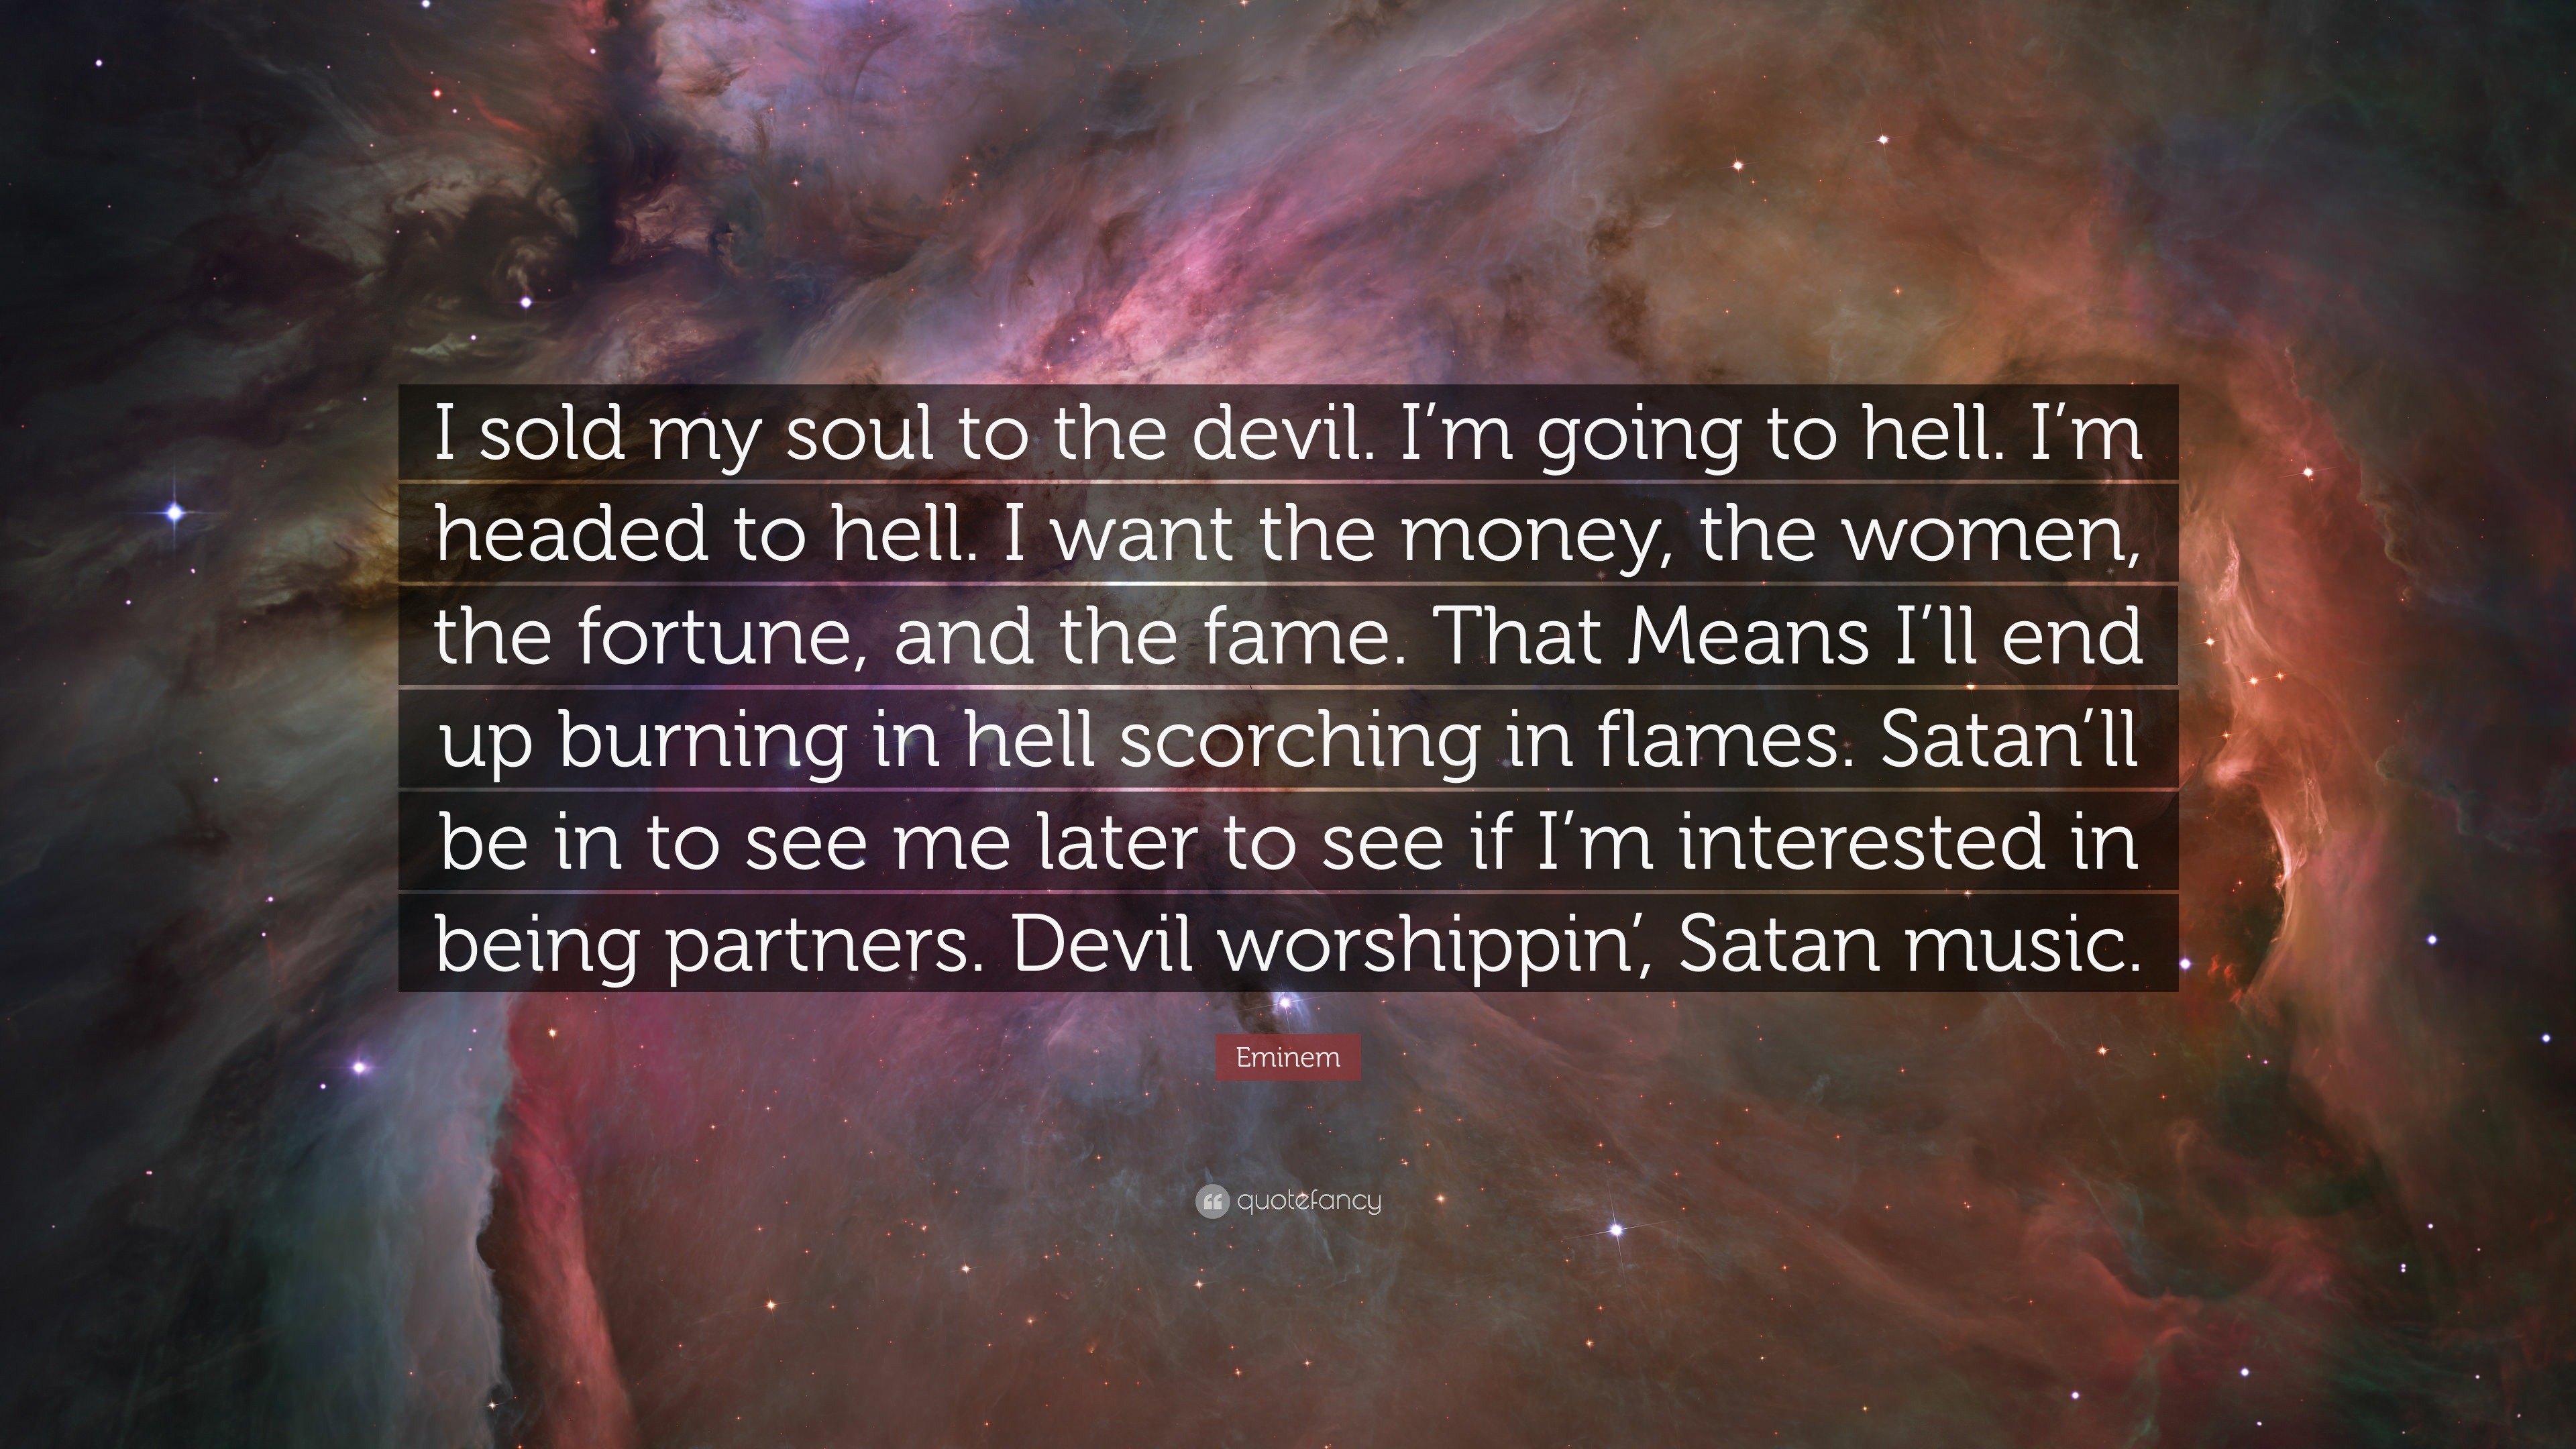 Is Eminem really satanic or are his lyrics about the devil and